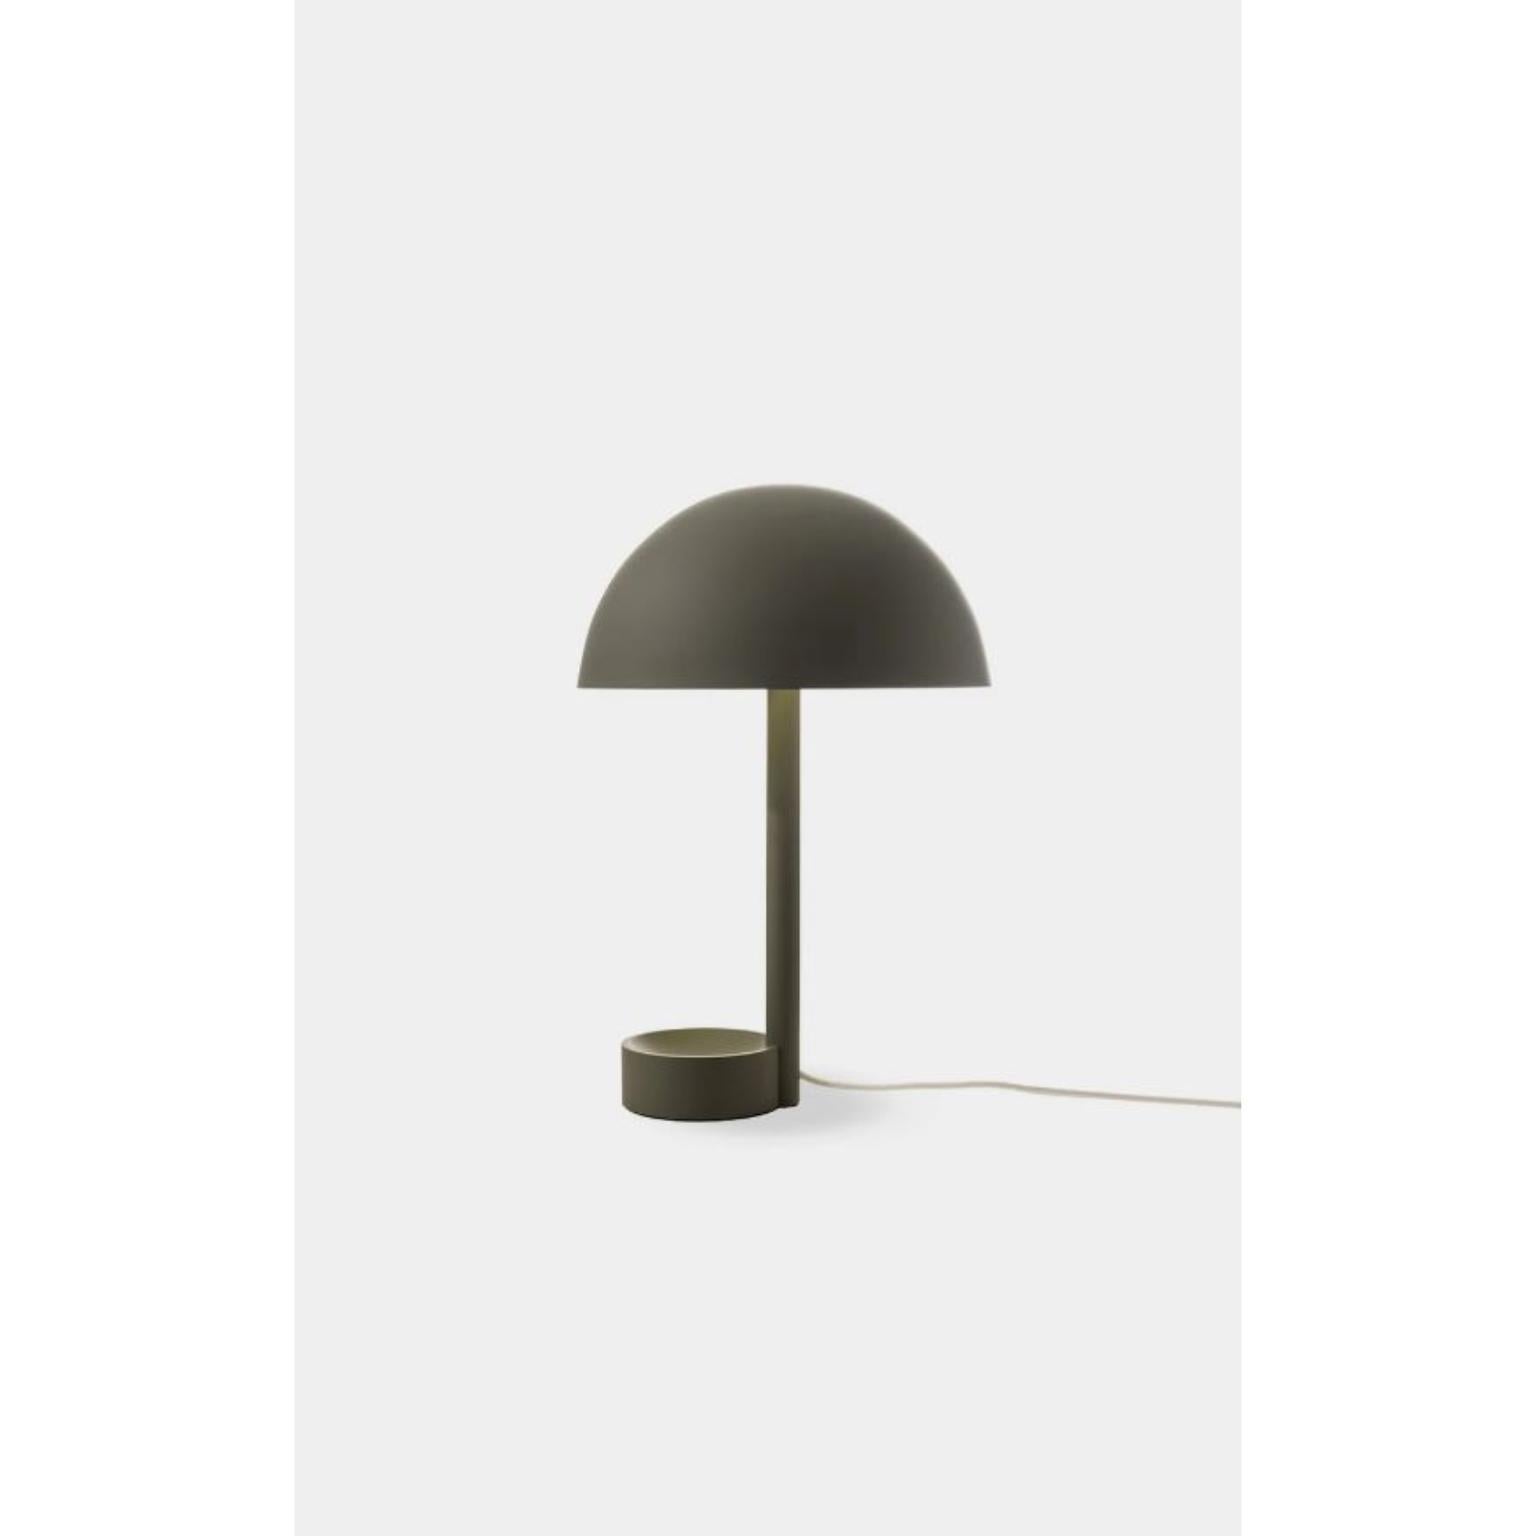 Leaf Green Copa Table Lamp by Wentz
Dimensions: D 30 x W 30 x H 45 cm
Materials: Aluminum.


WEIGHT: 2,1kg / 4,6 lbs
Colors: Black, White, Sand, Leaf Green.
LIGHT SOURCE: 150lm. 2700K. 90 CRI.
DIMMING No. Consult-us for dimming systems.
VOLTAGE: